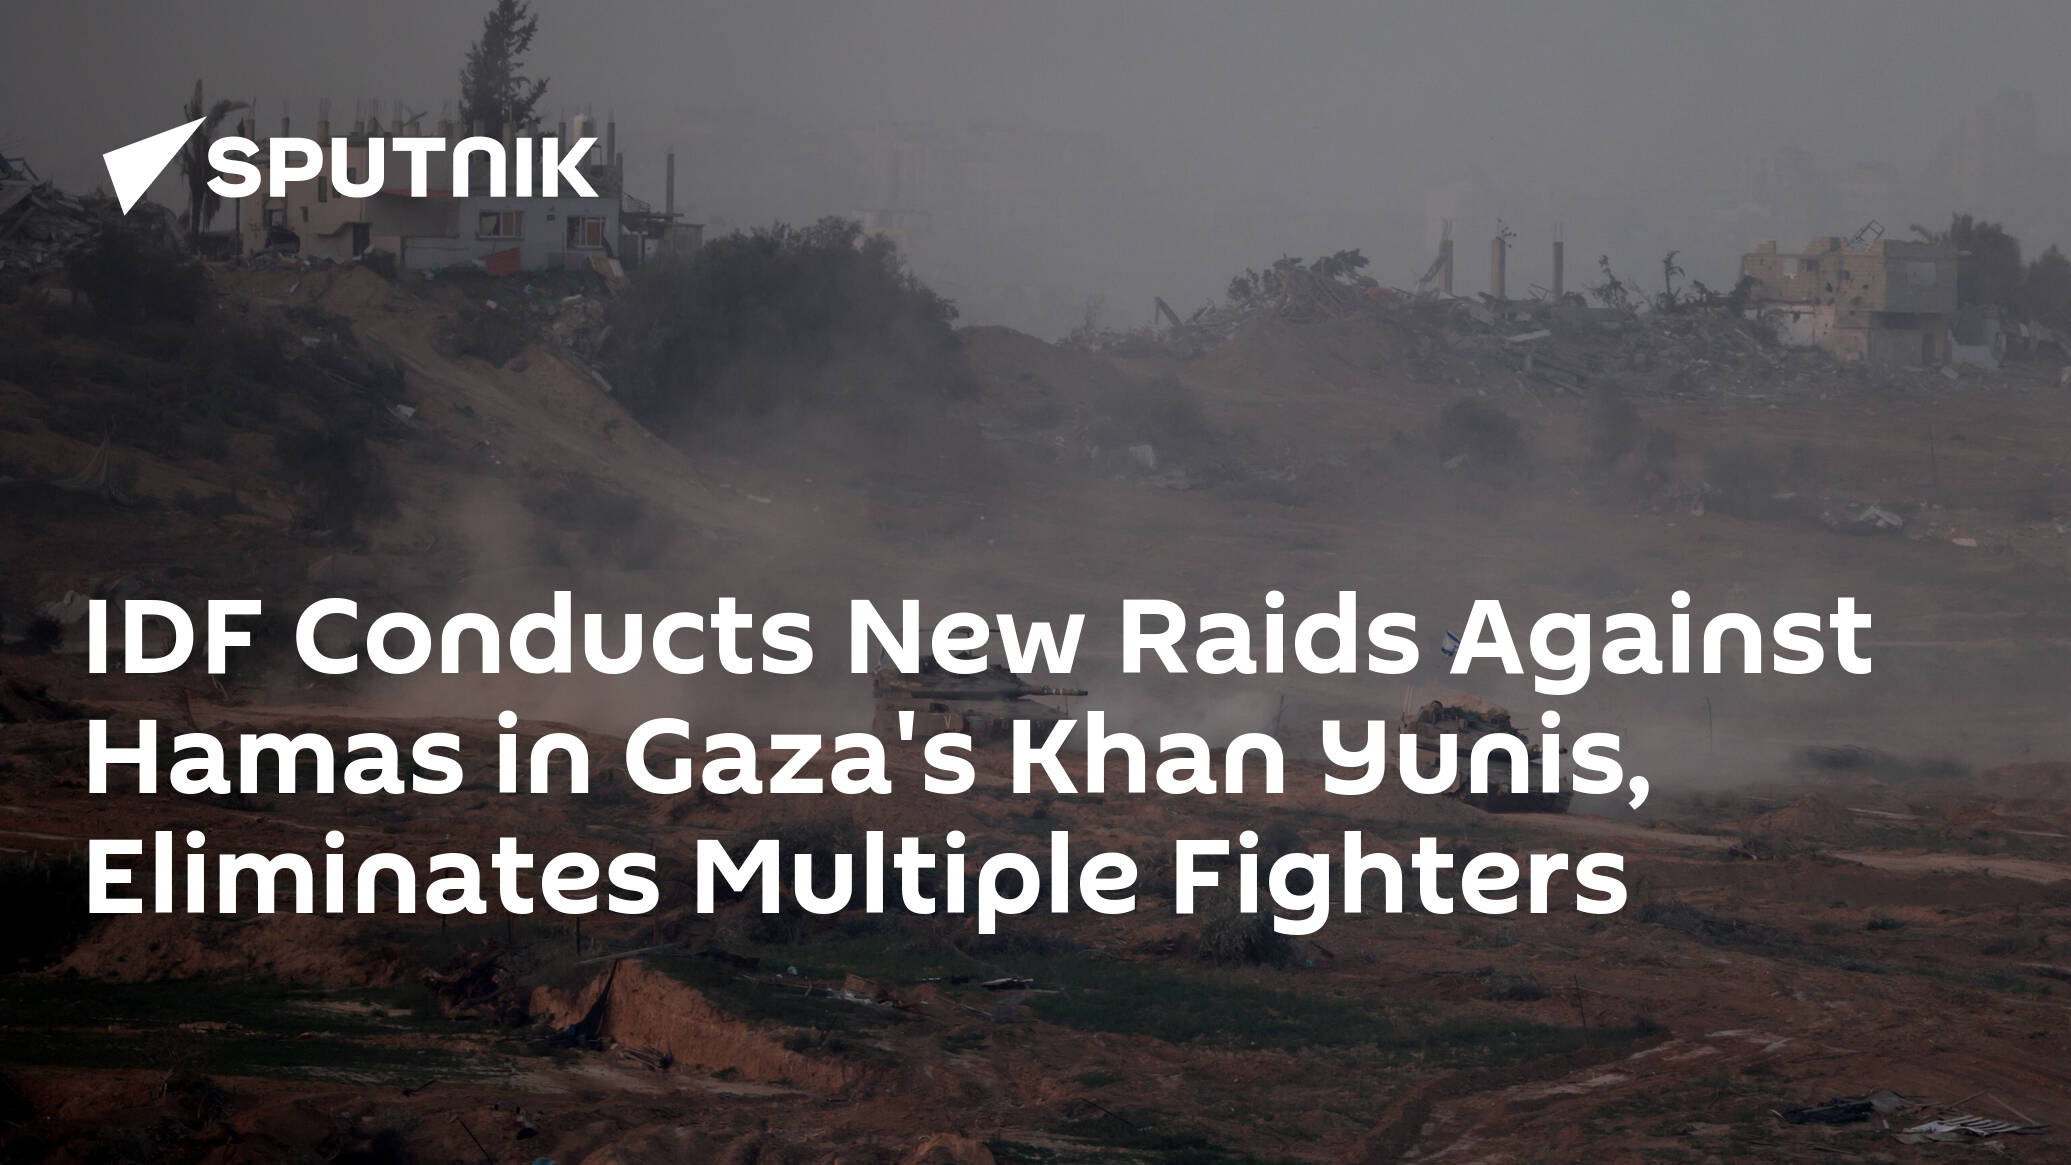 IDF Conducts New Raids Against Hamas in Gaza's Khan Yunis, Eliminates Multiple Fighters